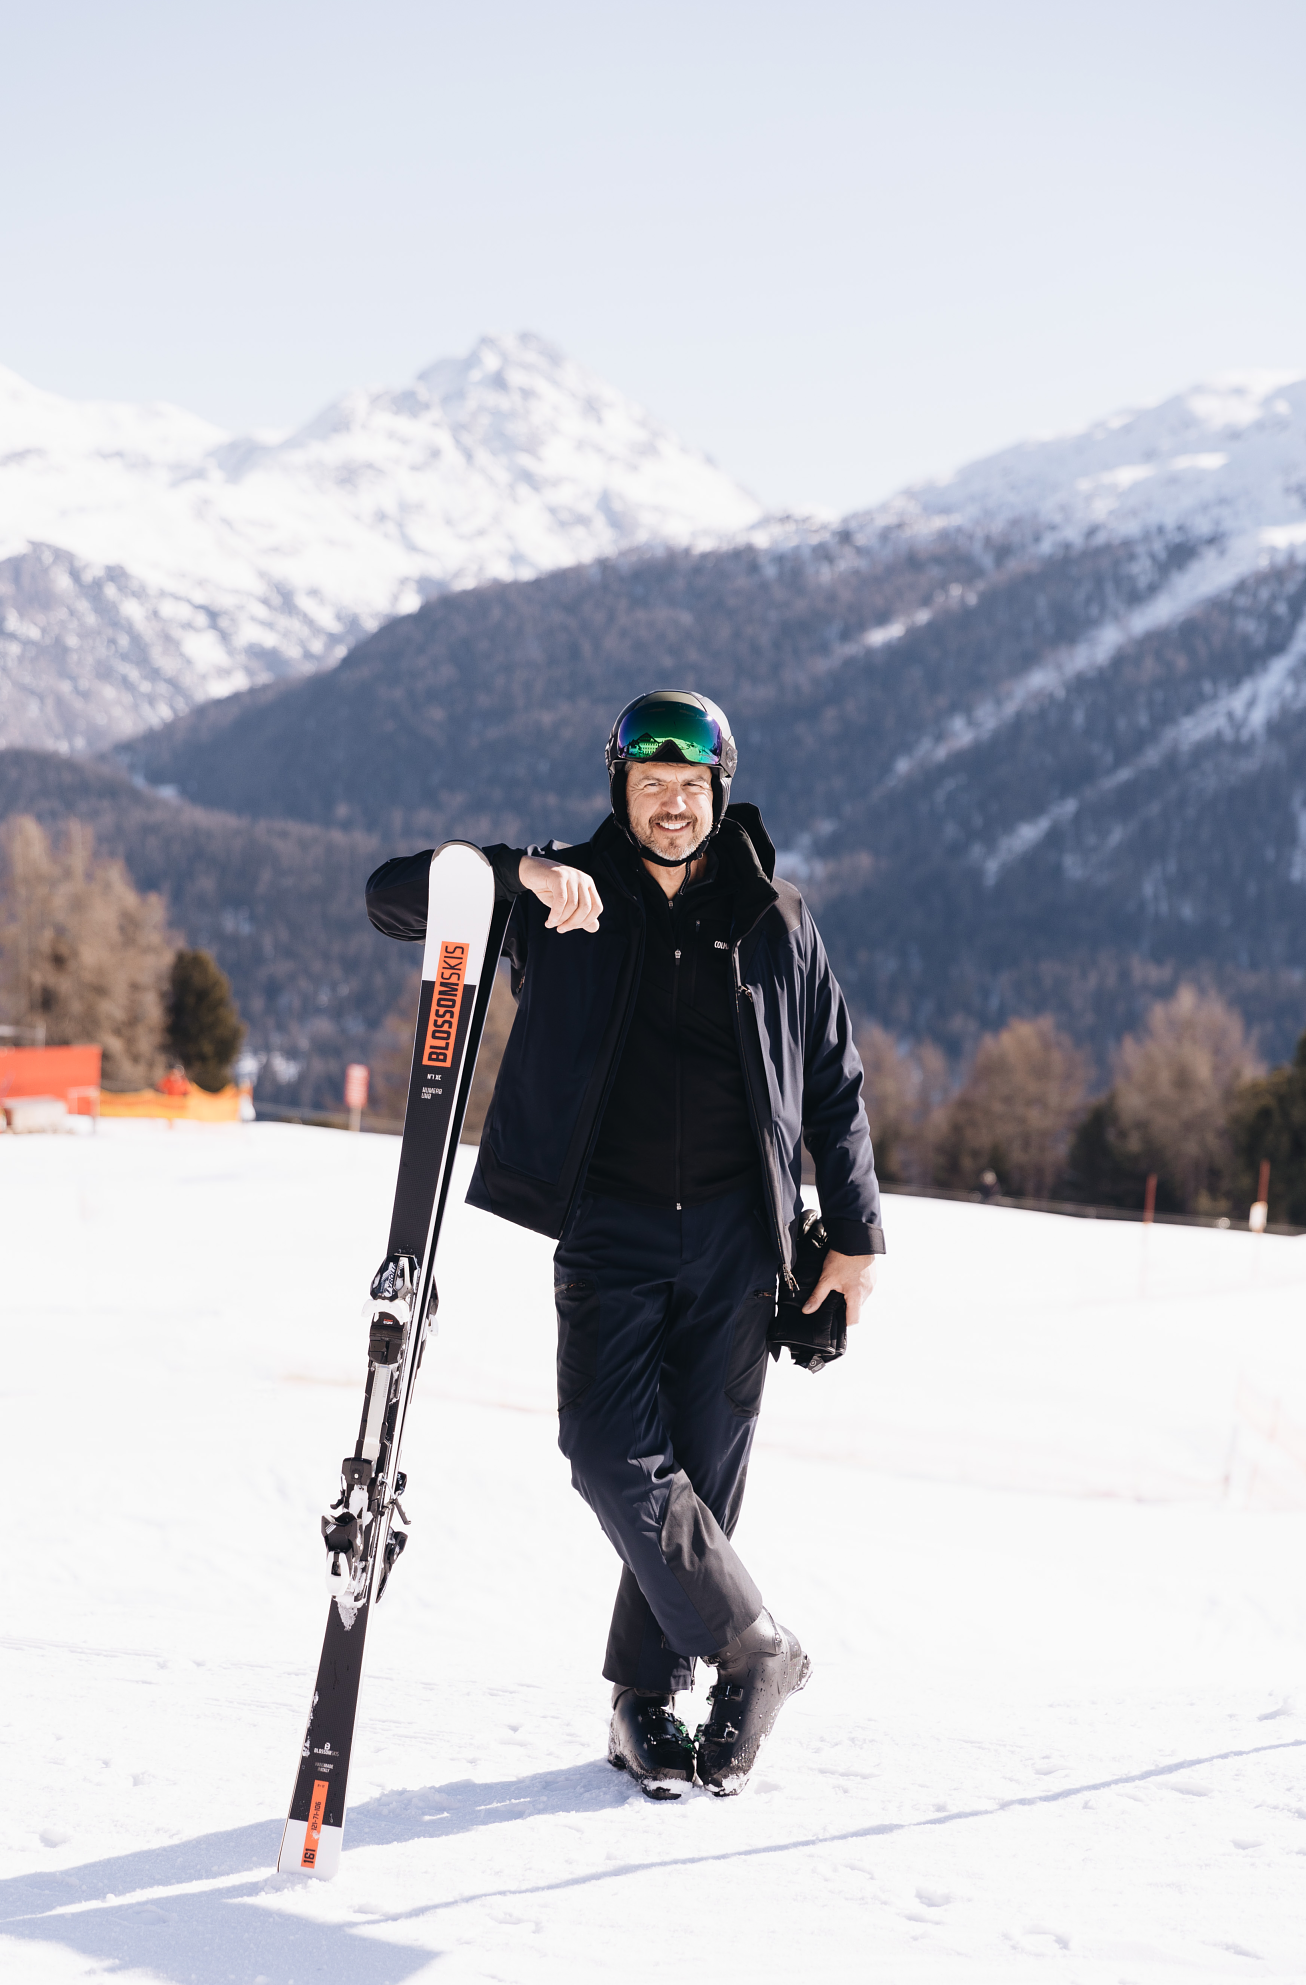 Chef Andrea Berton standing in the snow with a pair of skis